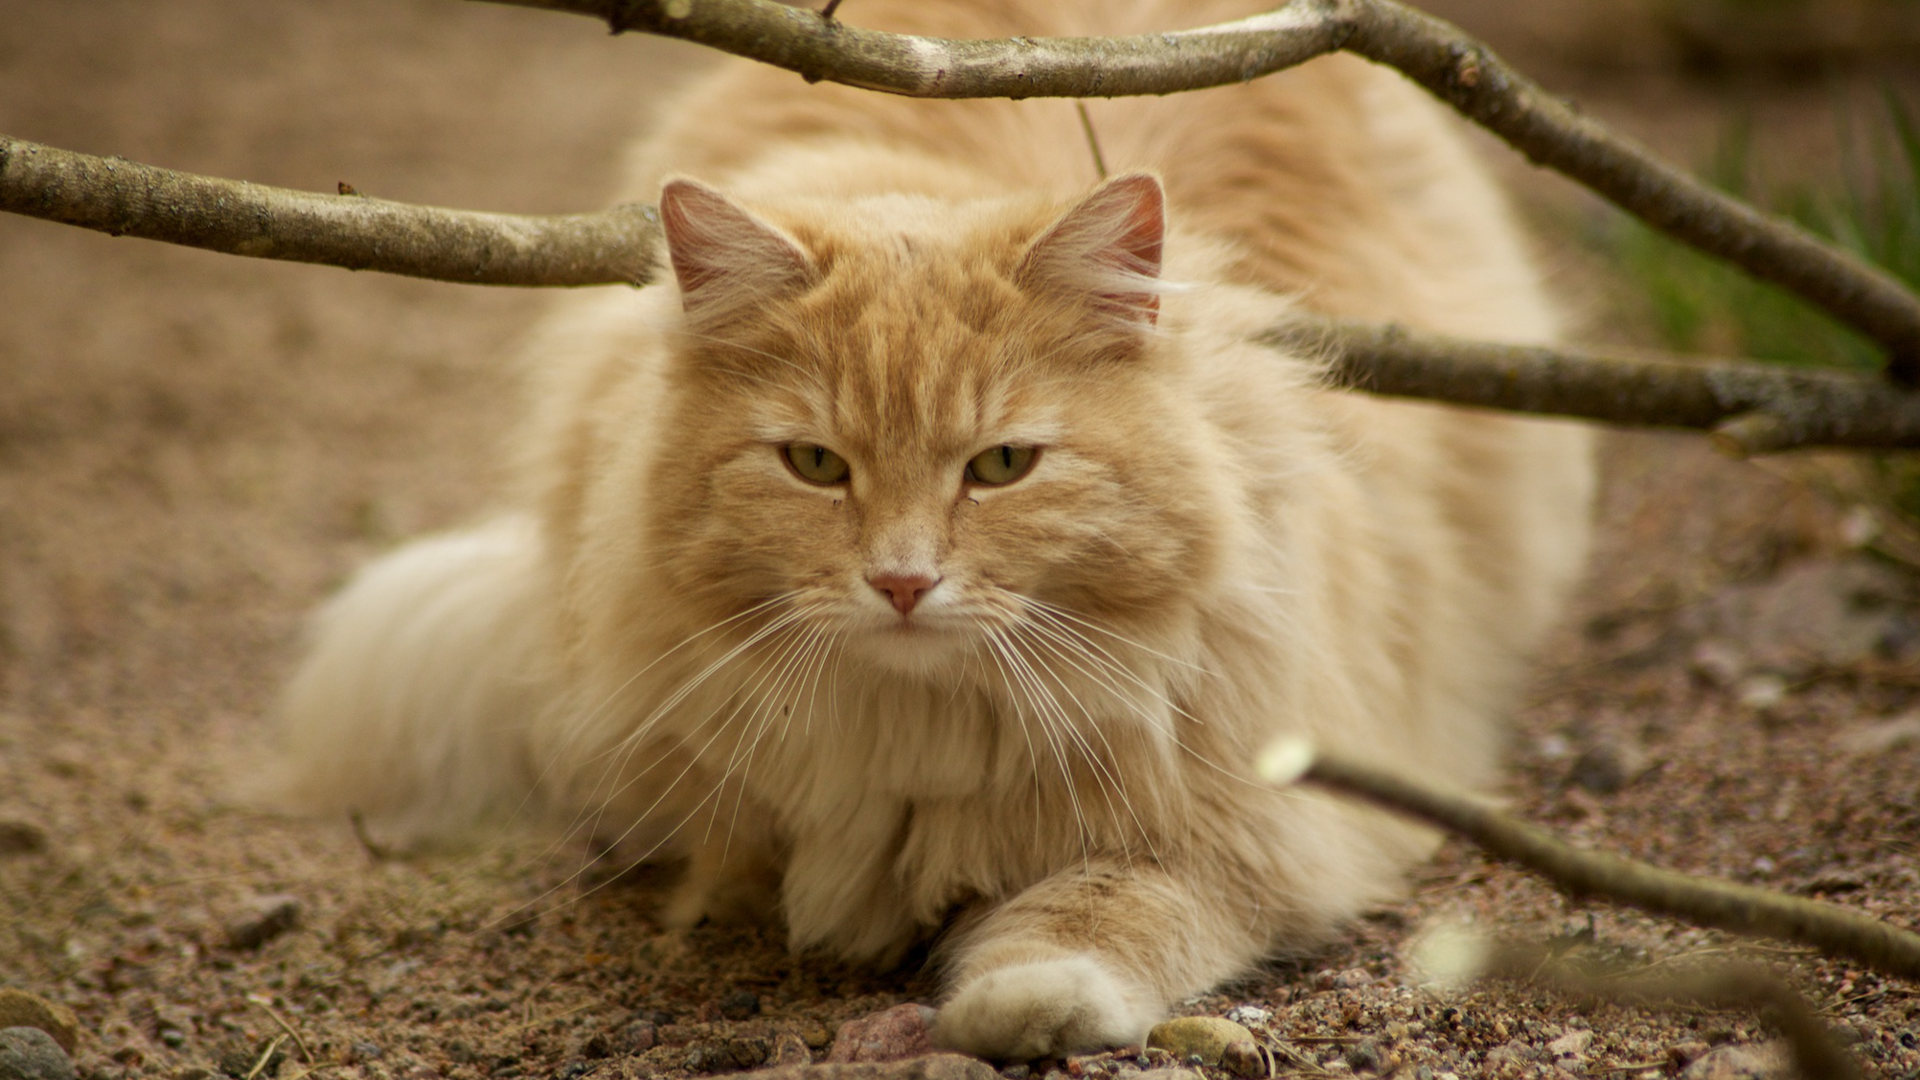 Red-haired Norwegian Forest cat in nature Desktop wallpapers 1920x1080